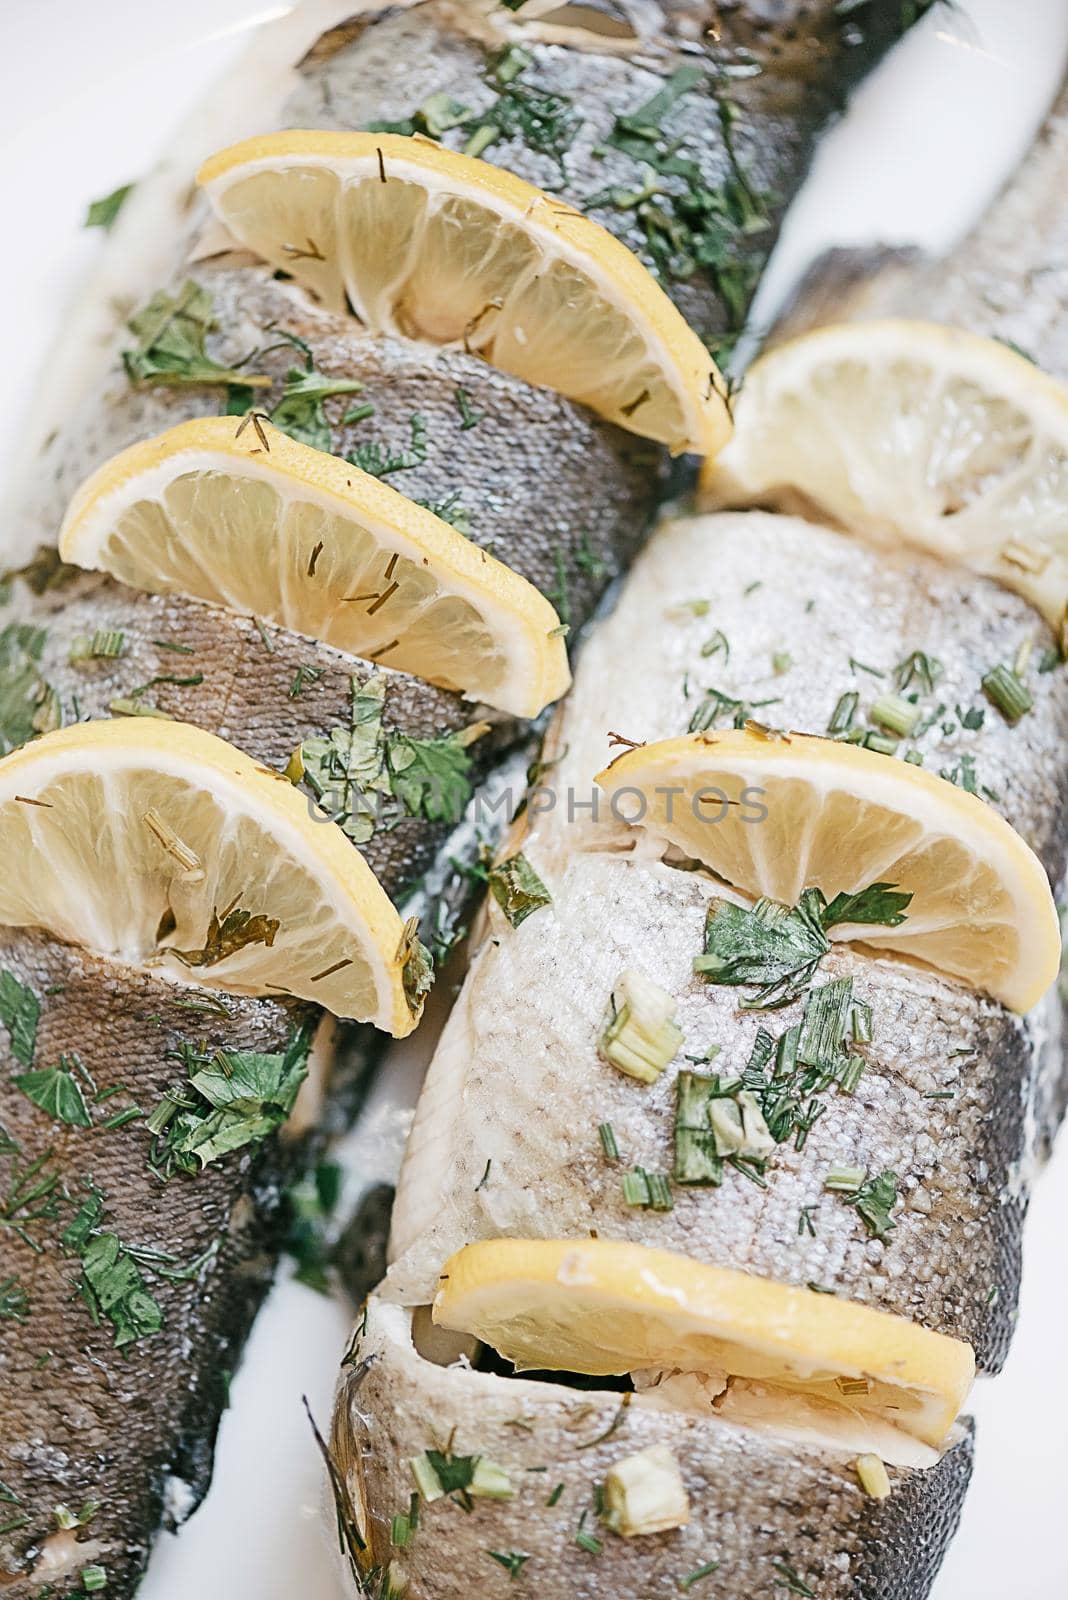 Baked fish trout dish with lemons and greenery, close-up top view.